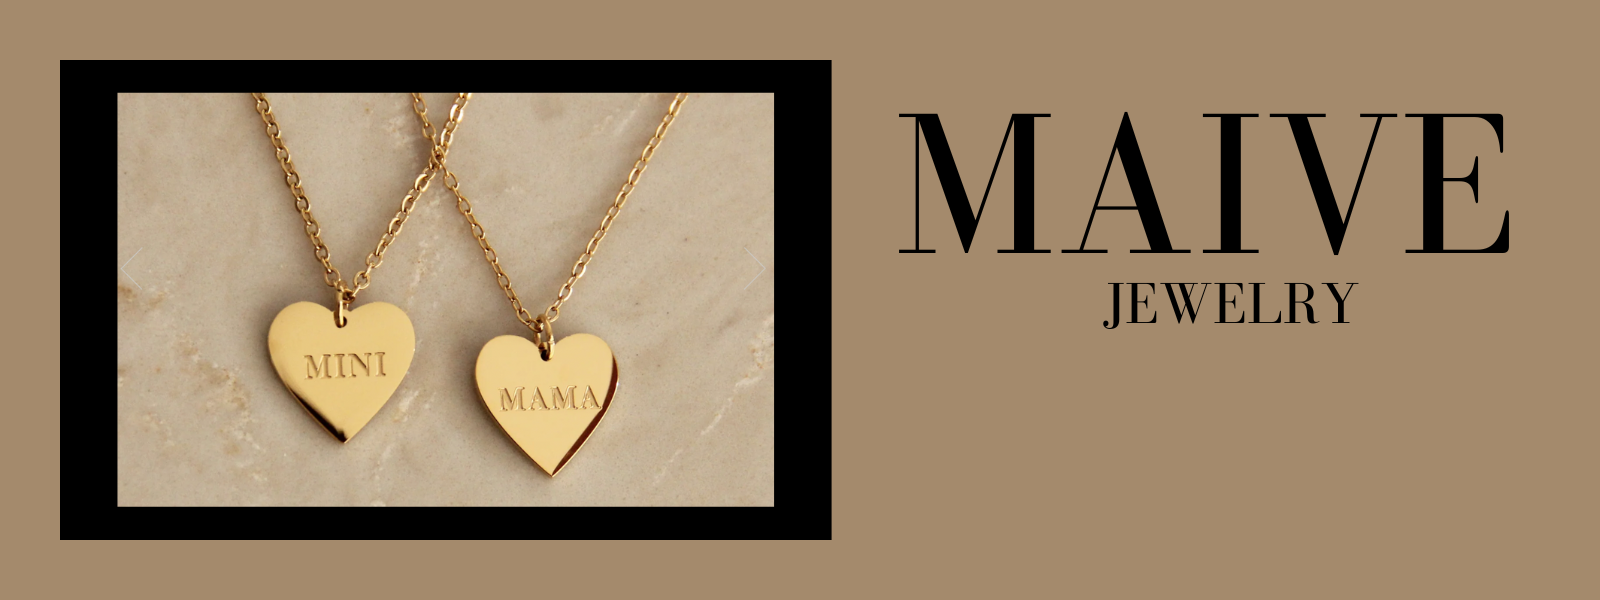 Maive Jewelry